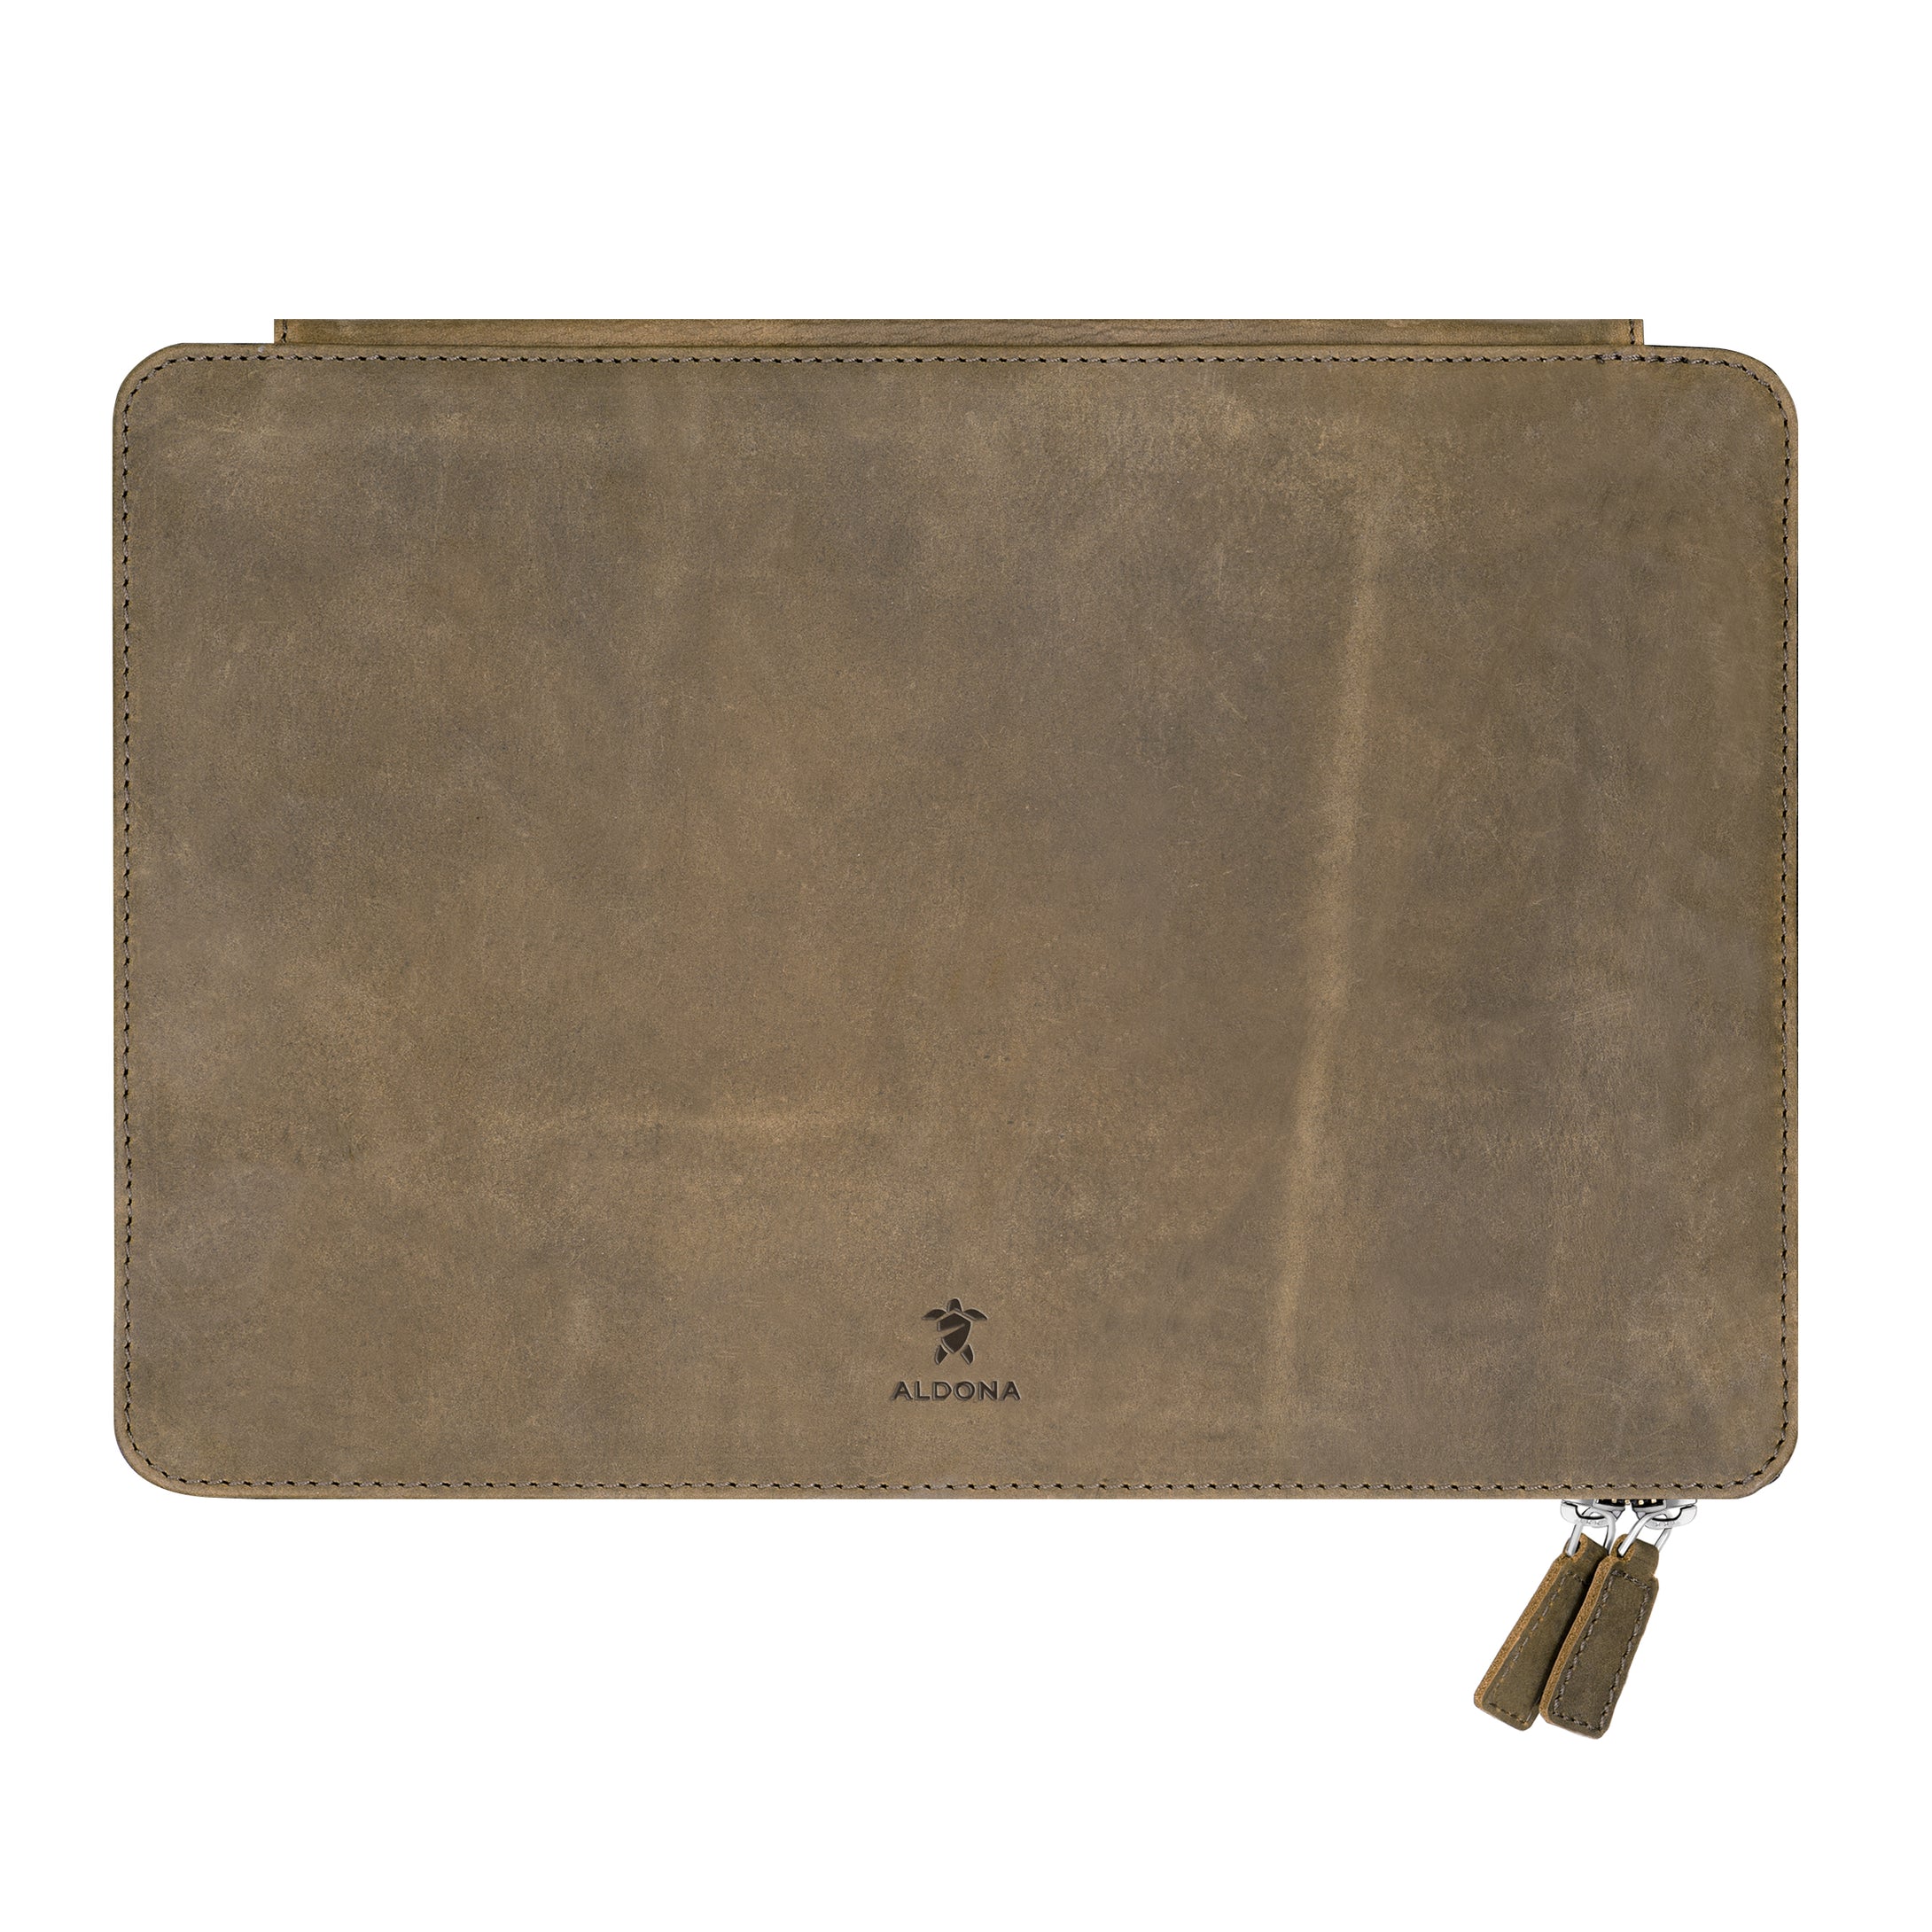 Megaleio Leather Sleeve for 13 Inch MacBook Pro (2016-2018) - Burnt Tobacco Colour